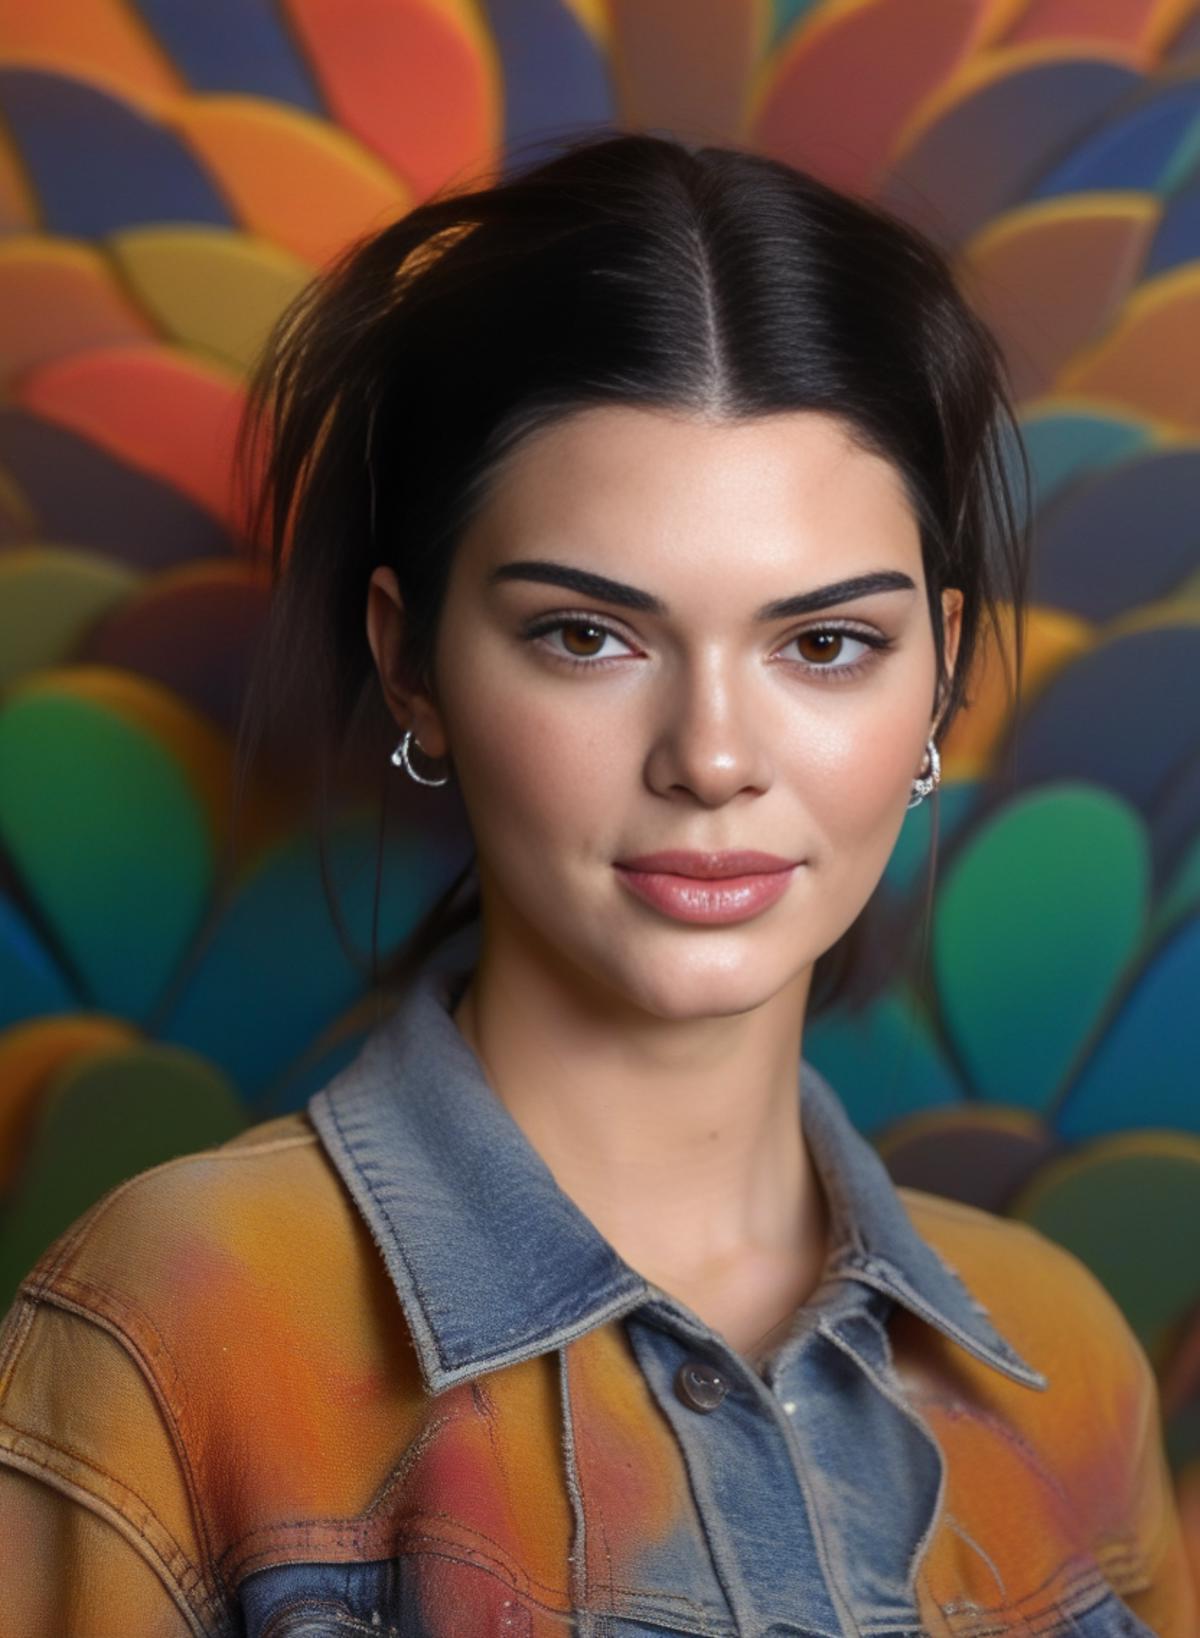 Kendall Jenner image by parar20